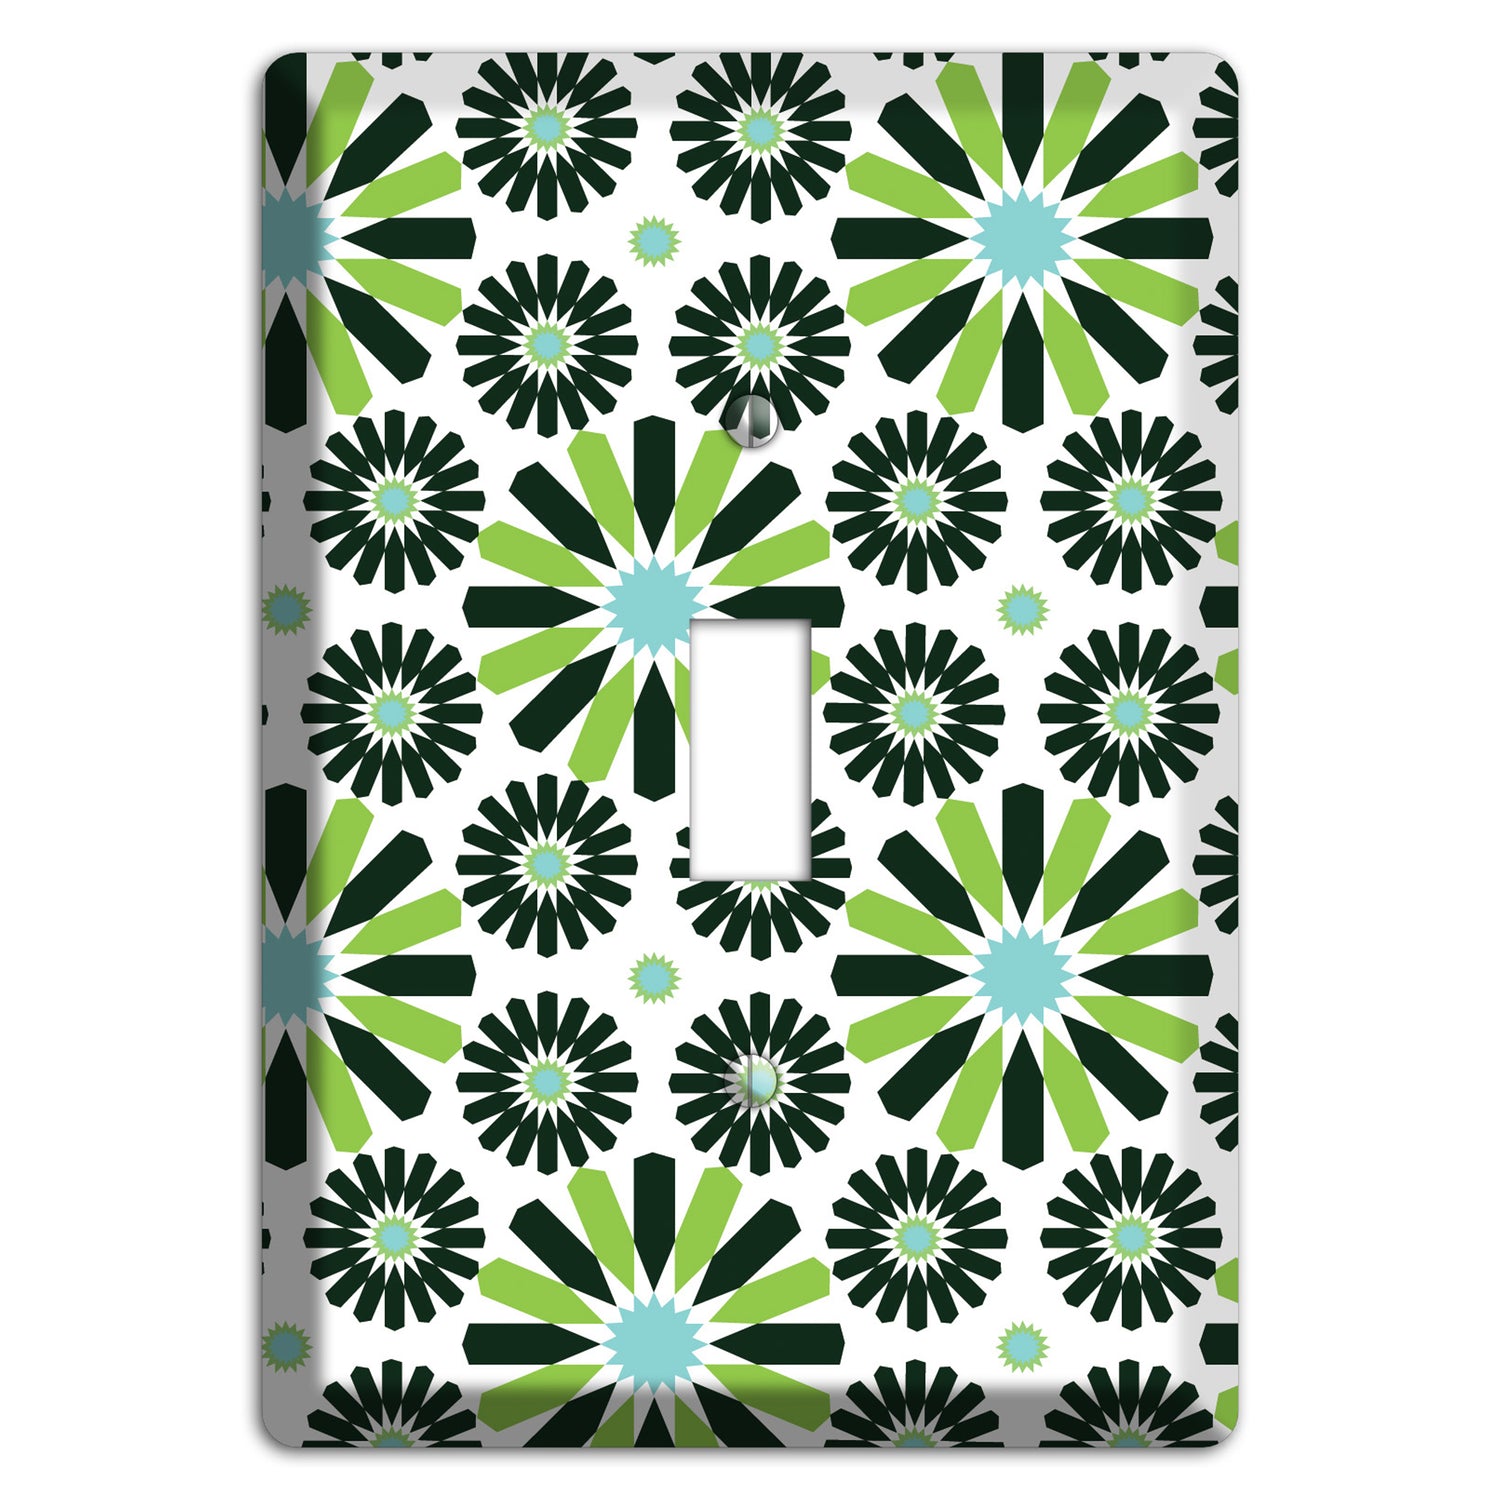 Lime and Teal Scandinavian Floral 2 Cover Plates